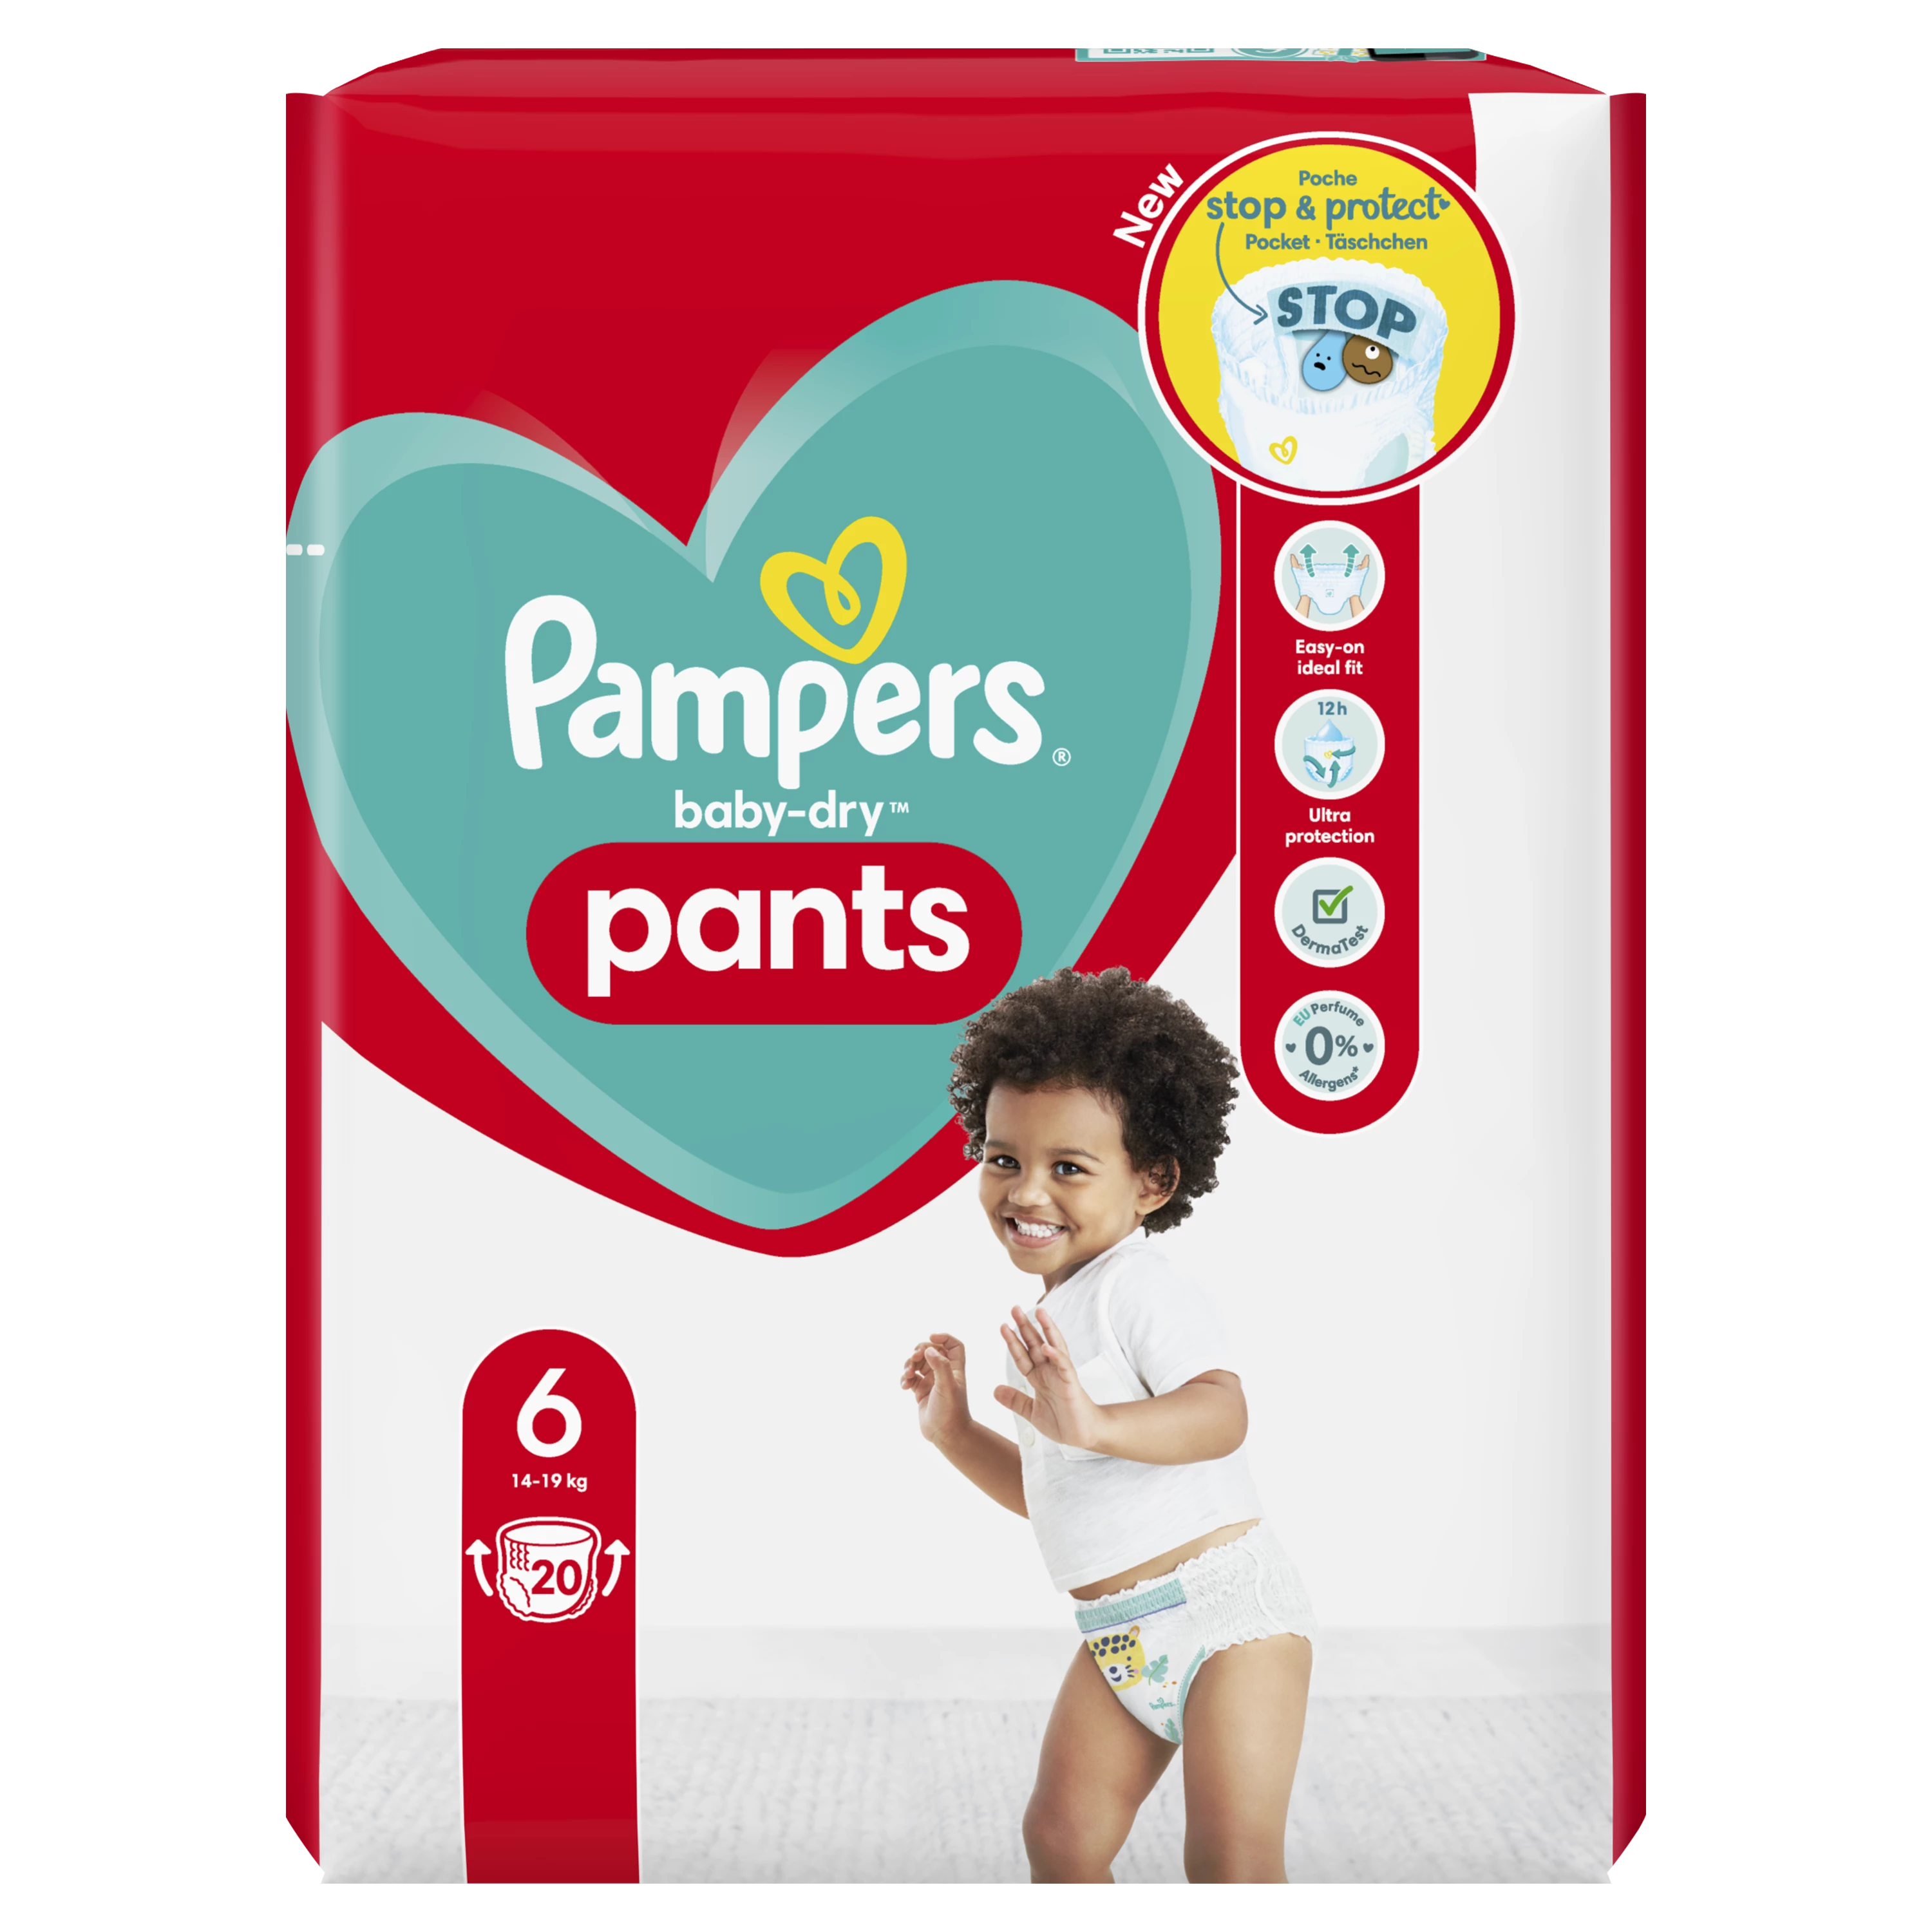 Pampers Baby Dry Paqt6 X20